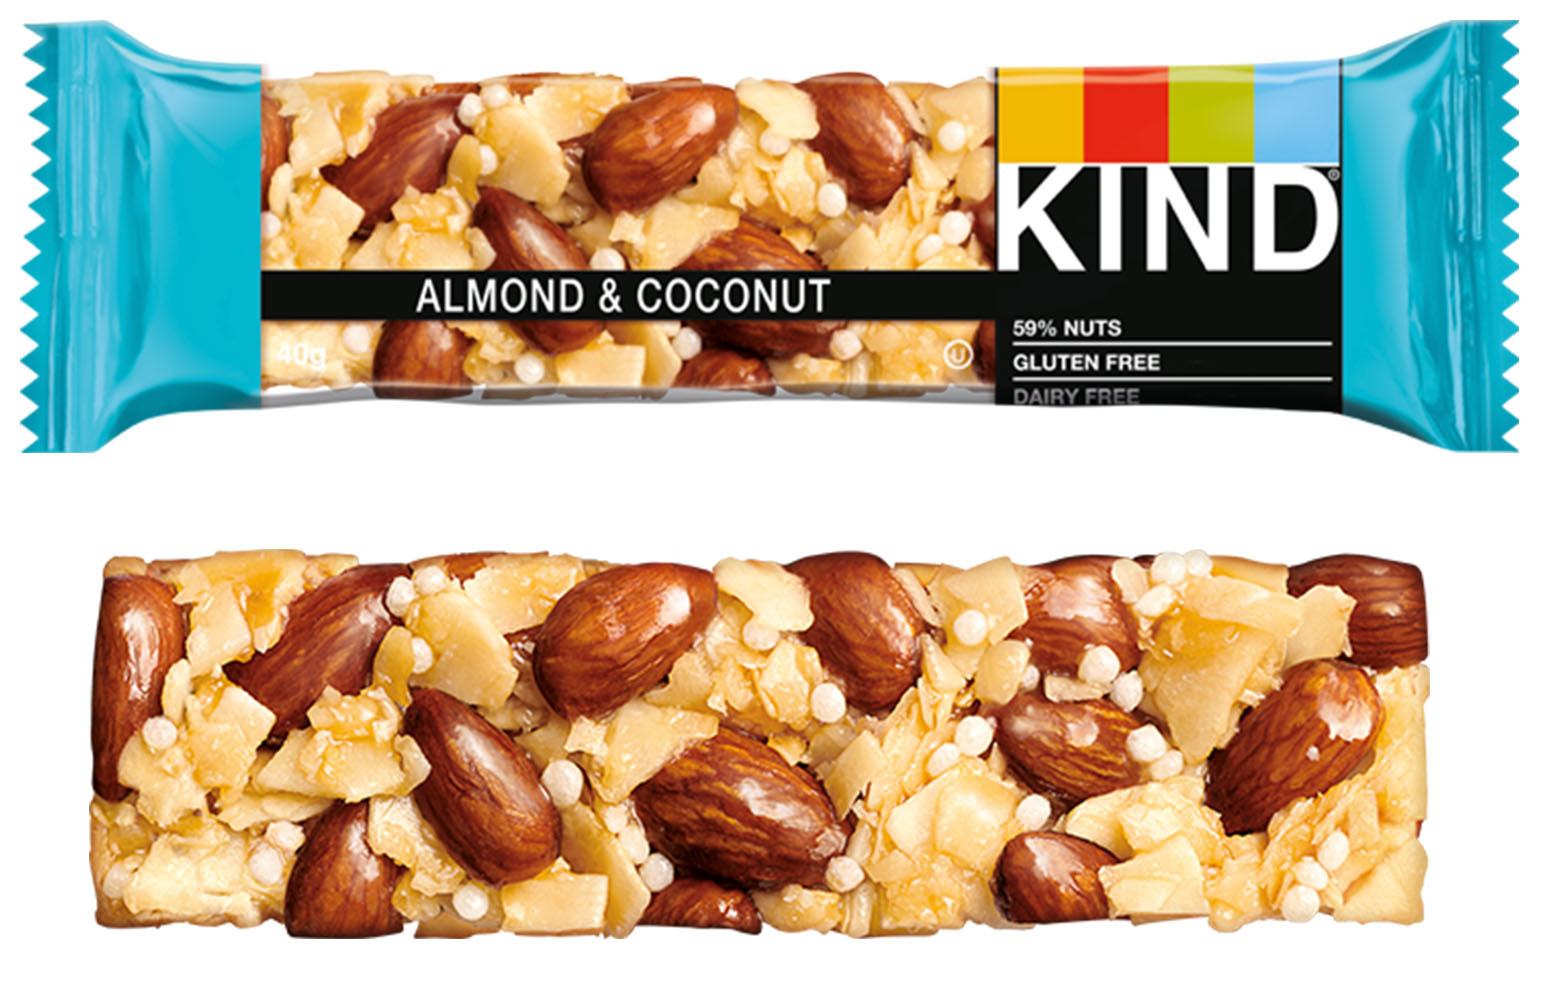 Kind Healthy Nut Bars - Almond & Coconut 12x 40g Pack (Best Before 27/11/20)